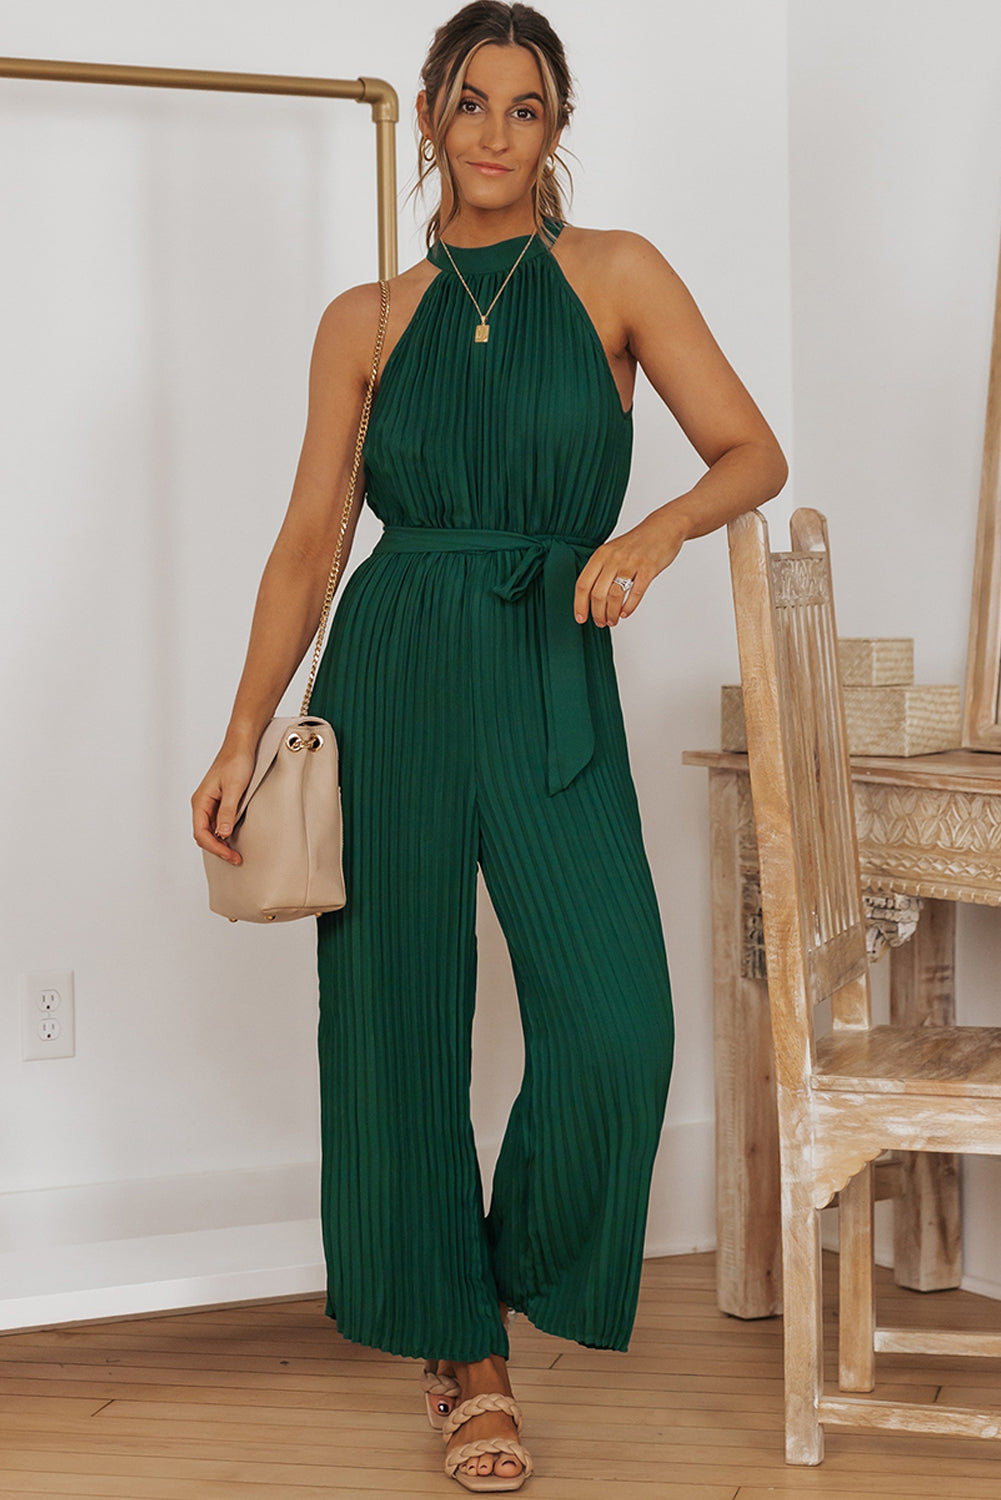 Accordion Pleated Belted Grecian Neck Sleeveless Jumpsuit - Green / S Girl Code